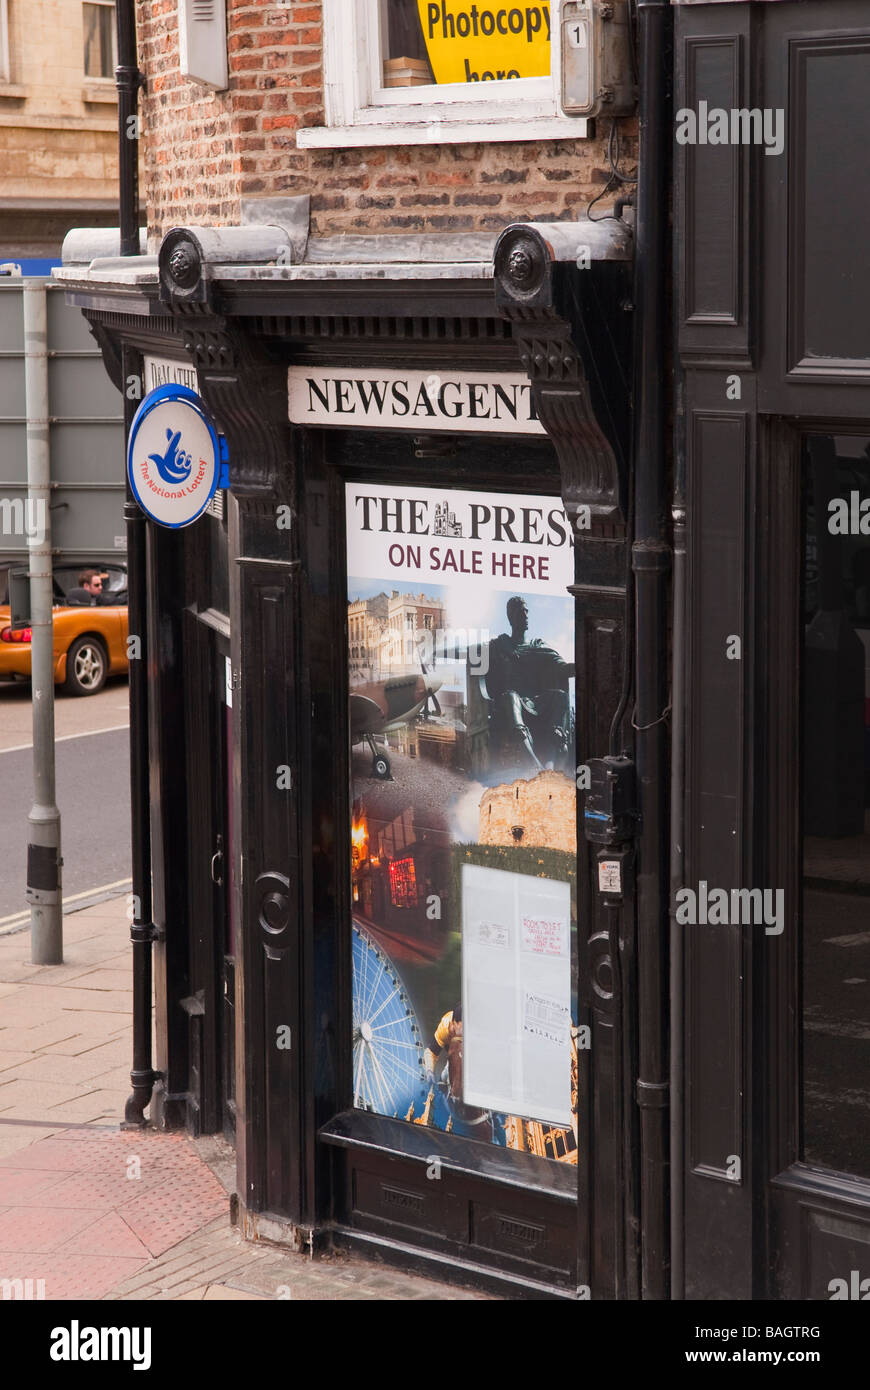 A newsagents shop store advertising newspapers for sale in the Uk Stock Photo